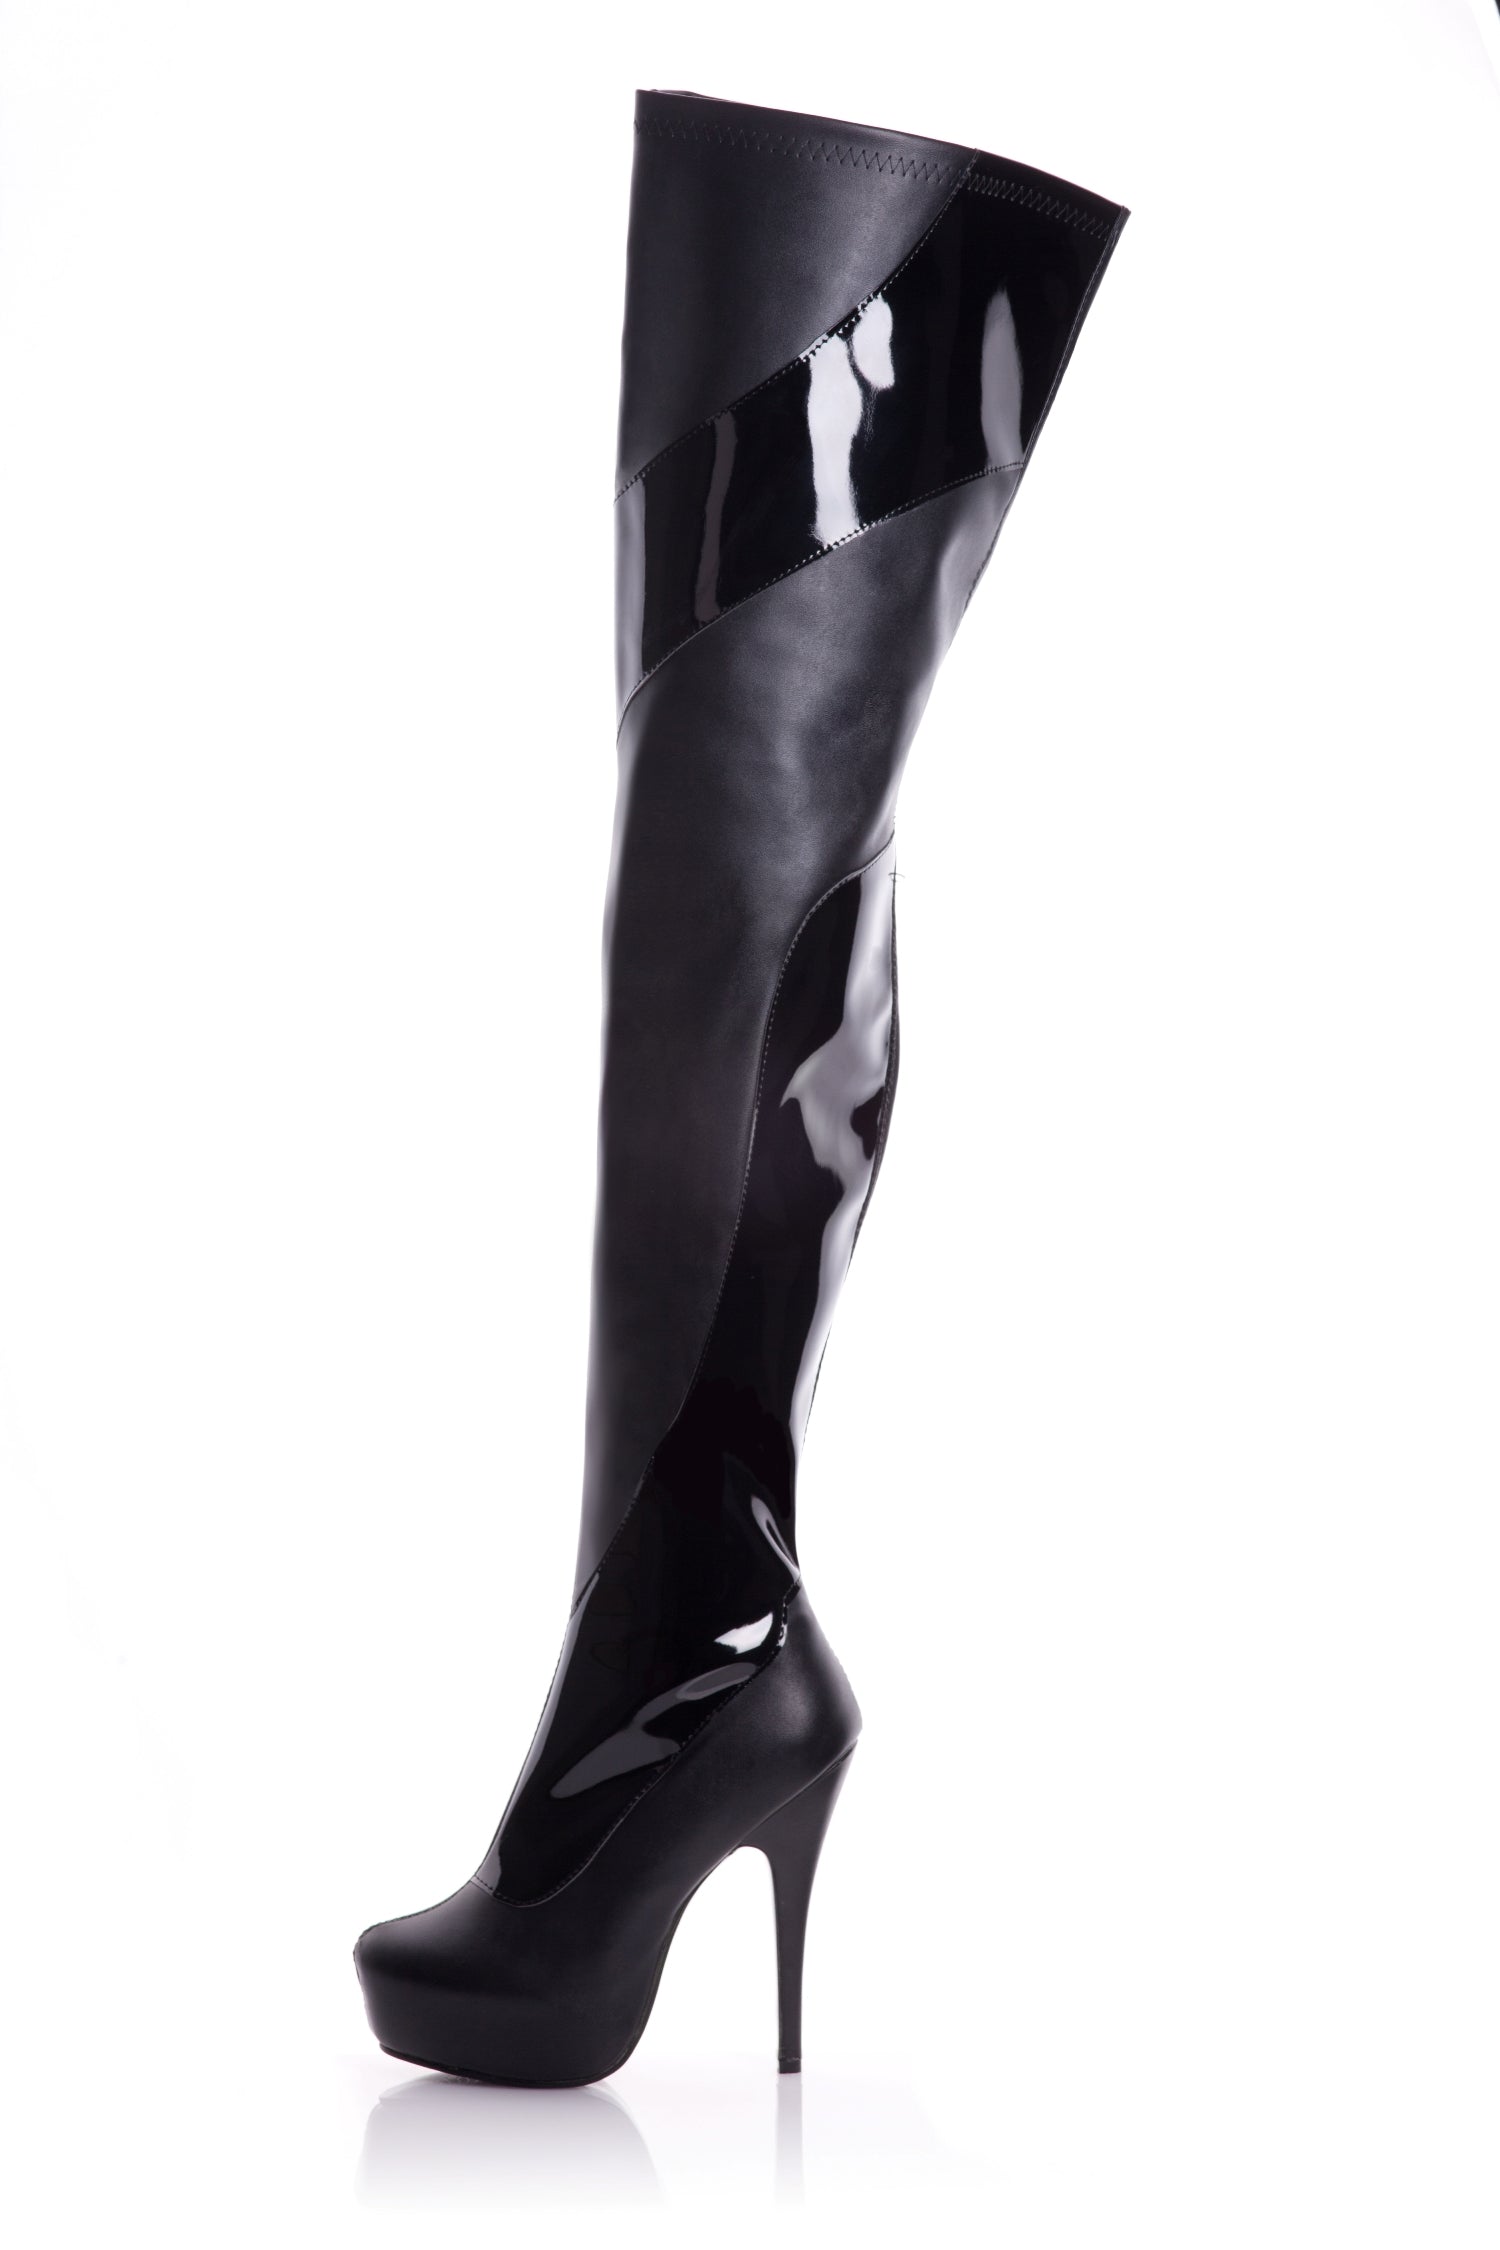 Playgirl Thigh High Black Matt Boots With Patent Detail